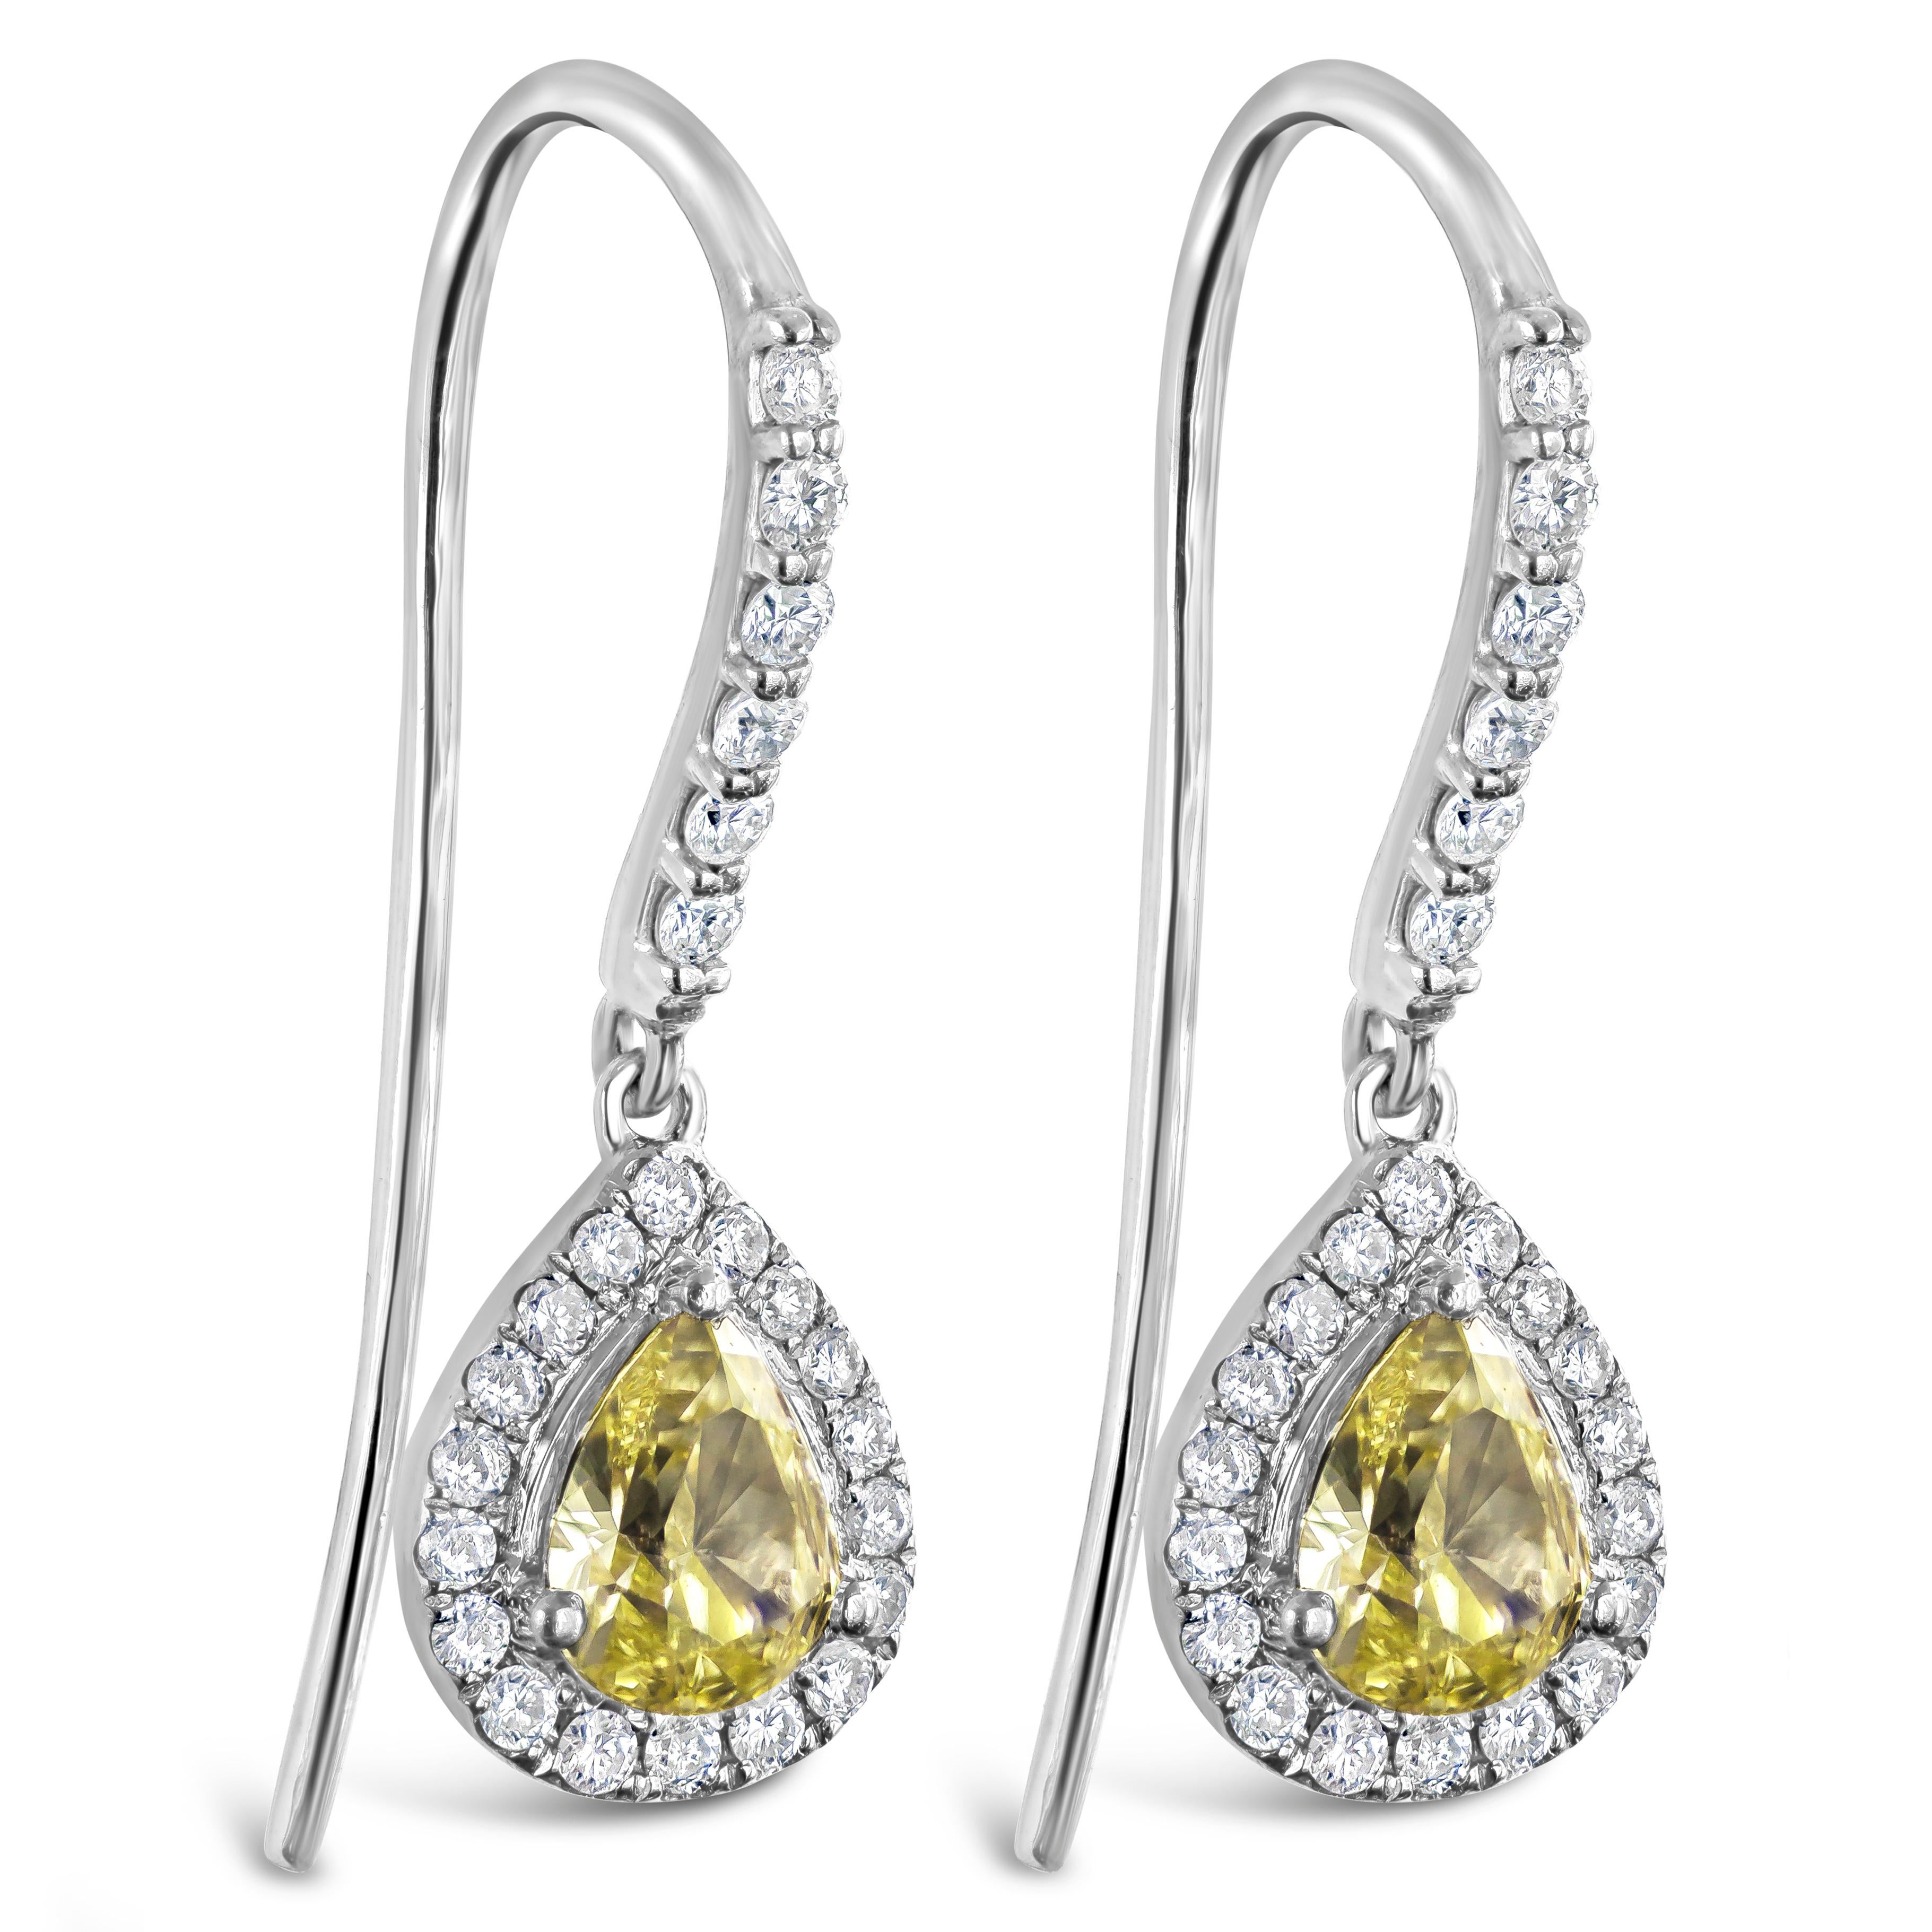 Color-rich pear-shaped yellow diamonds take the spotlight in this magnificent dangle earrings. Each yellow diamond is surrounded by a single row of sparkling round diamonds attached to an accented 18 karat white gold french hook. Yellow diamonds